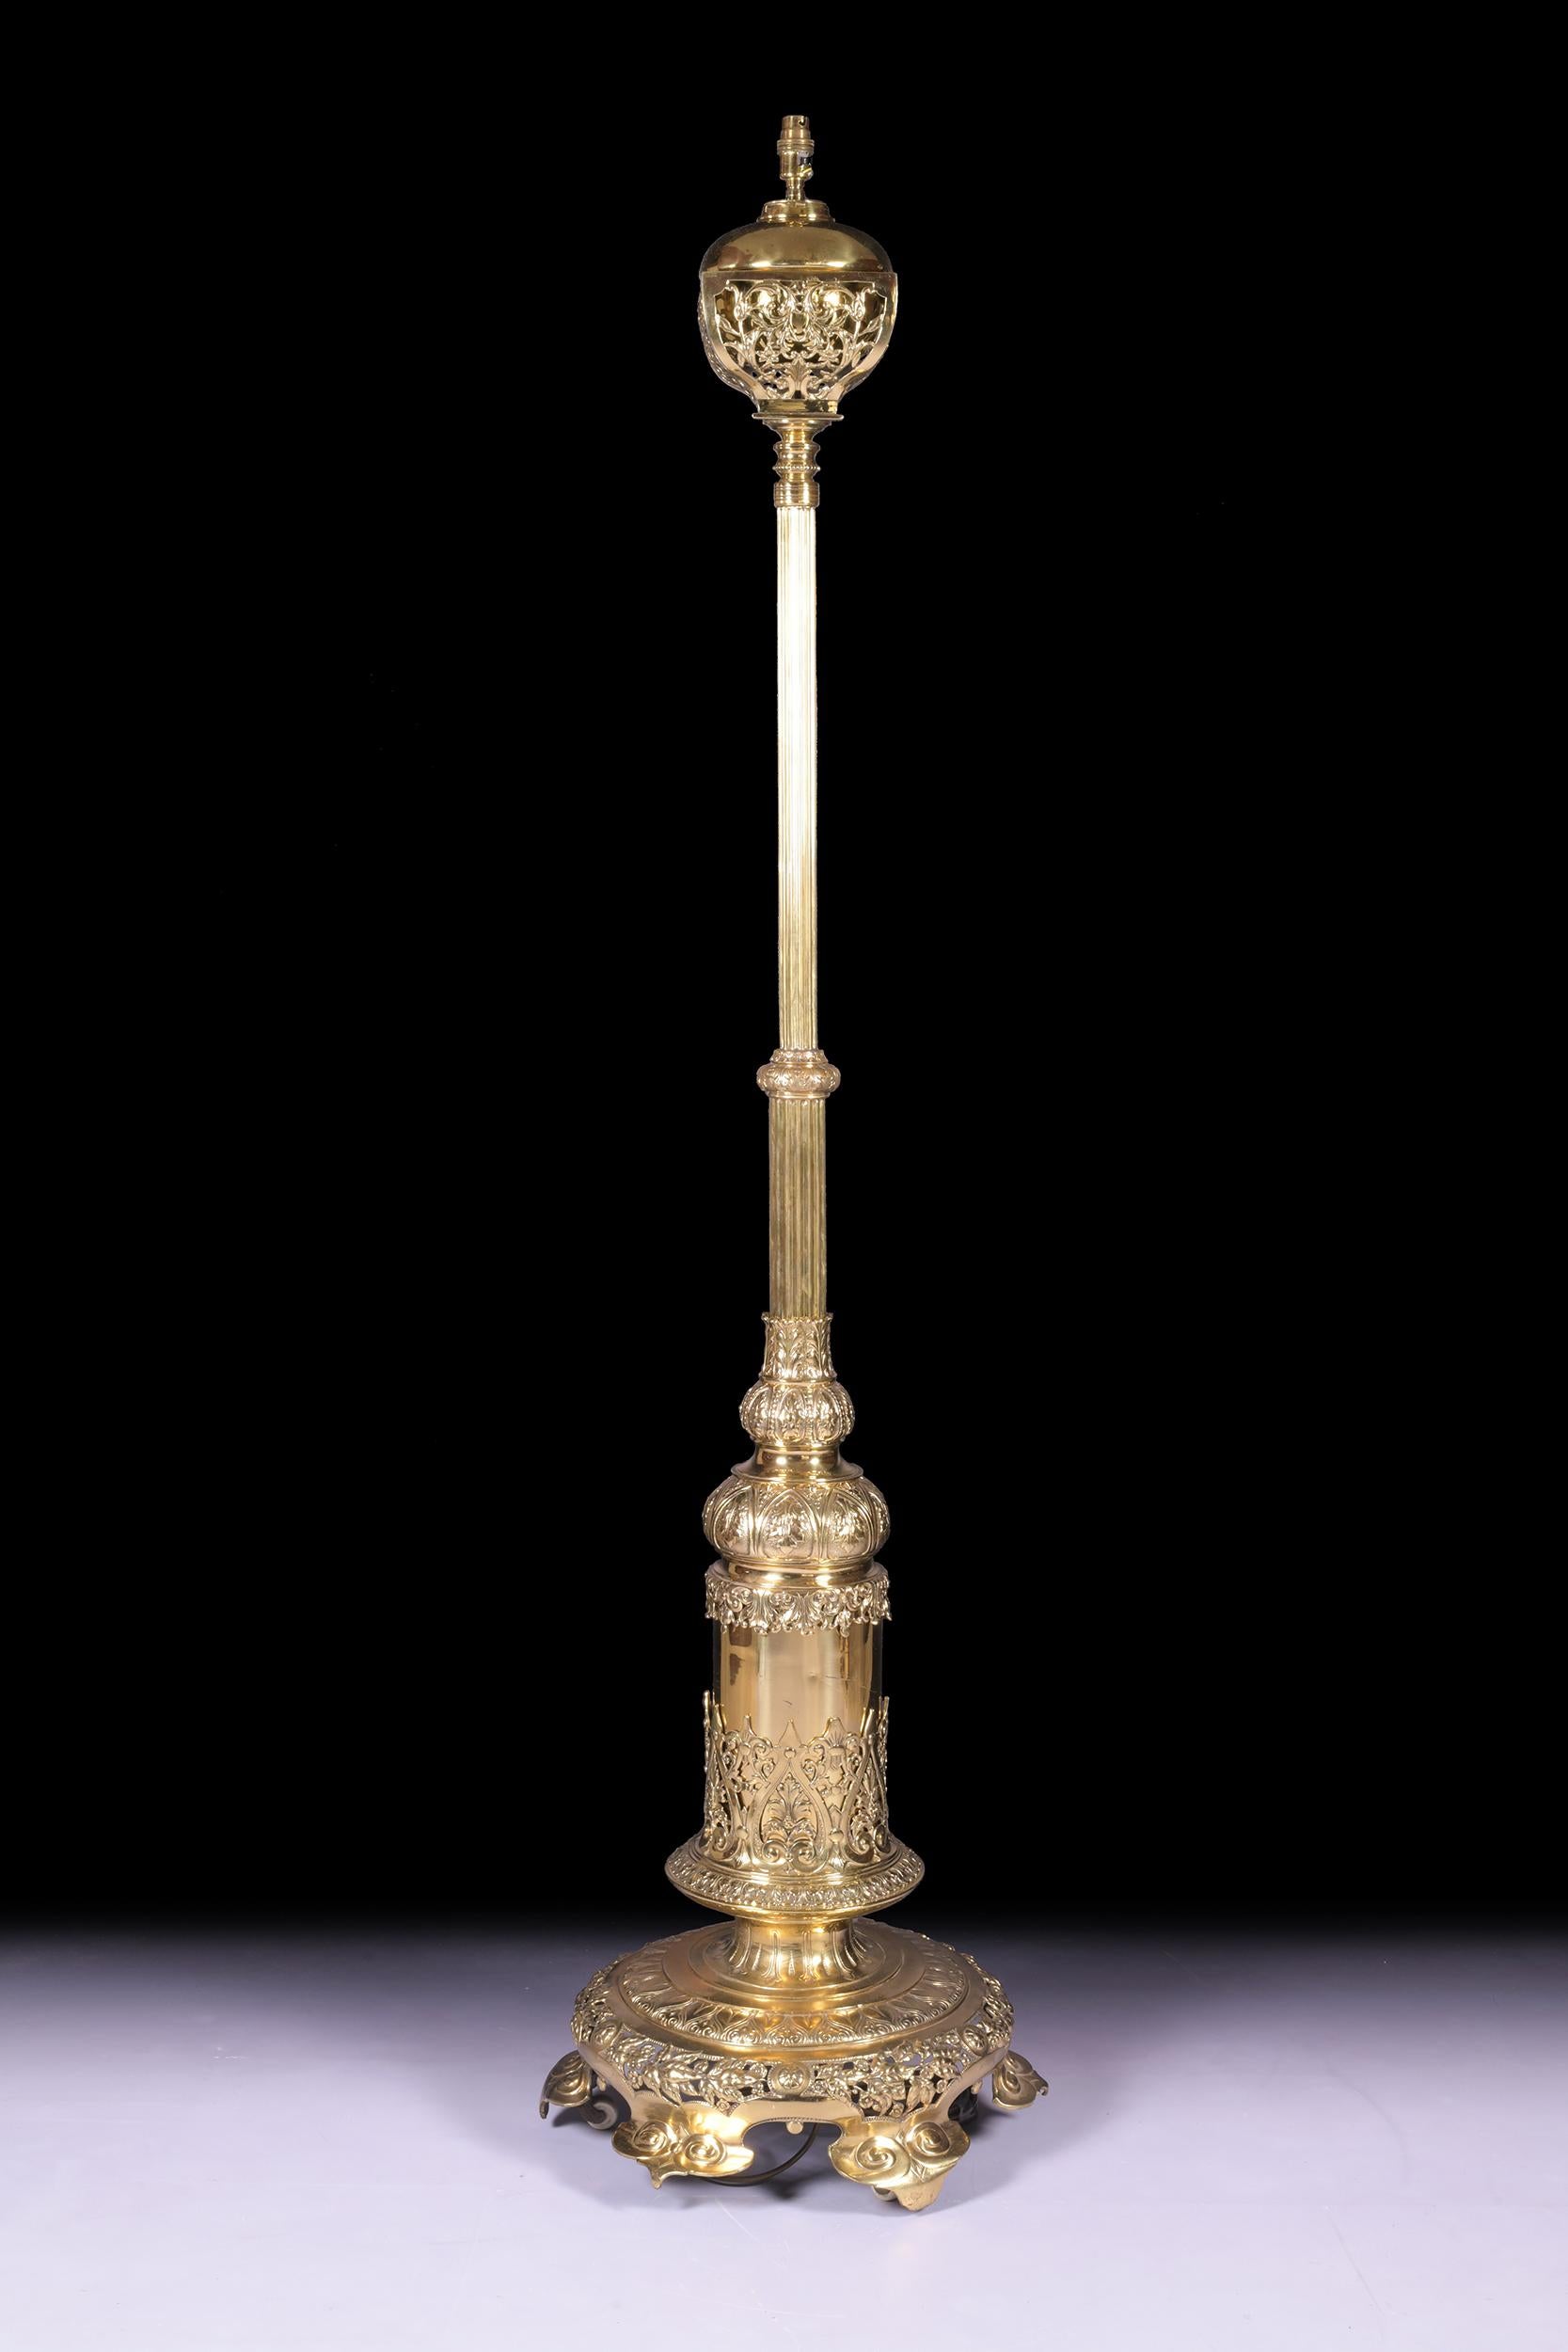 An exceptional quality 19th century brass standard lamp. This highly attractive and exhibition quality Victorian telescopic brass floor standard lamp now converted to electricity.
This lamp features a cylindrical reeded column decorated with